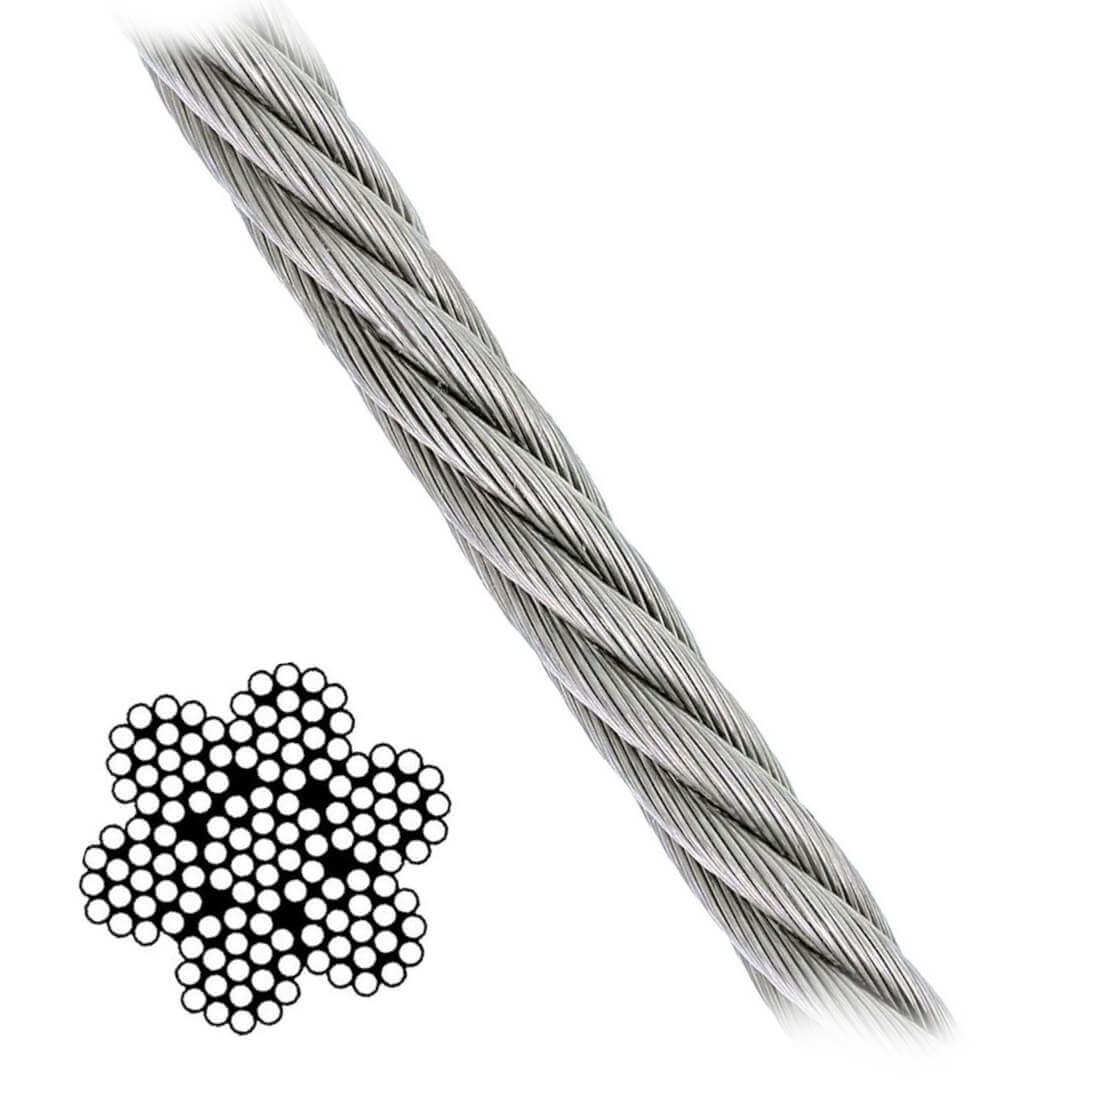 7x19 Galvanized Aircraft Cable available at Baremotion